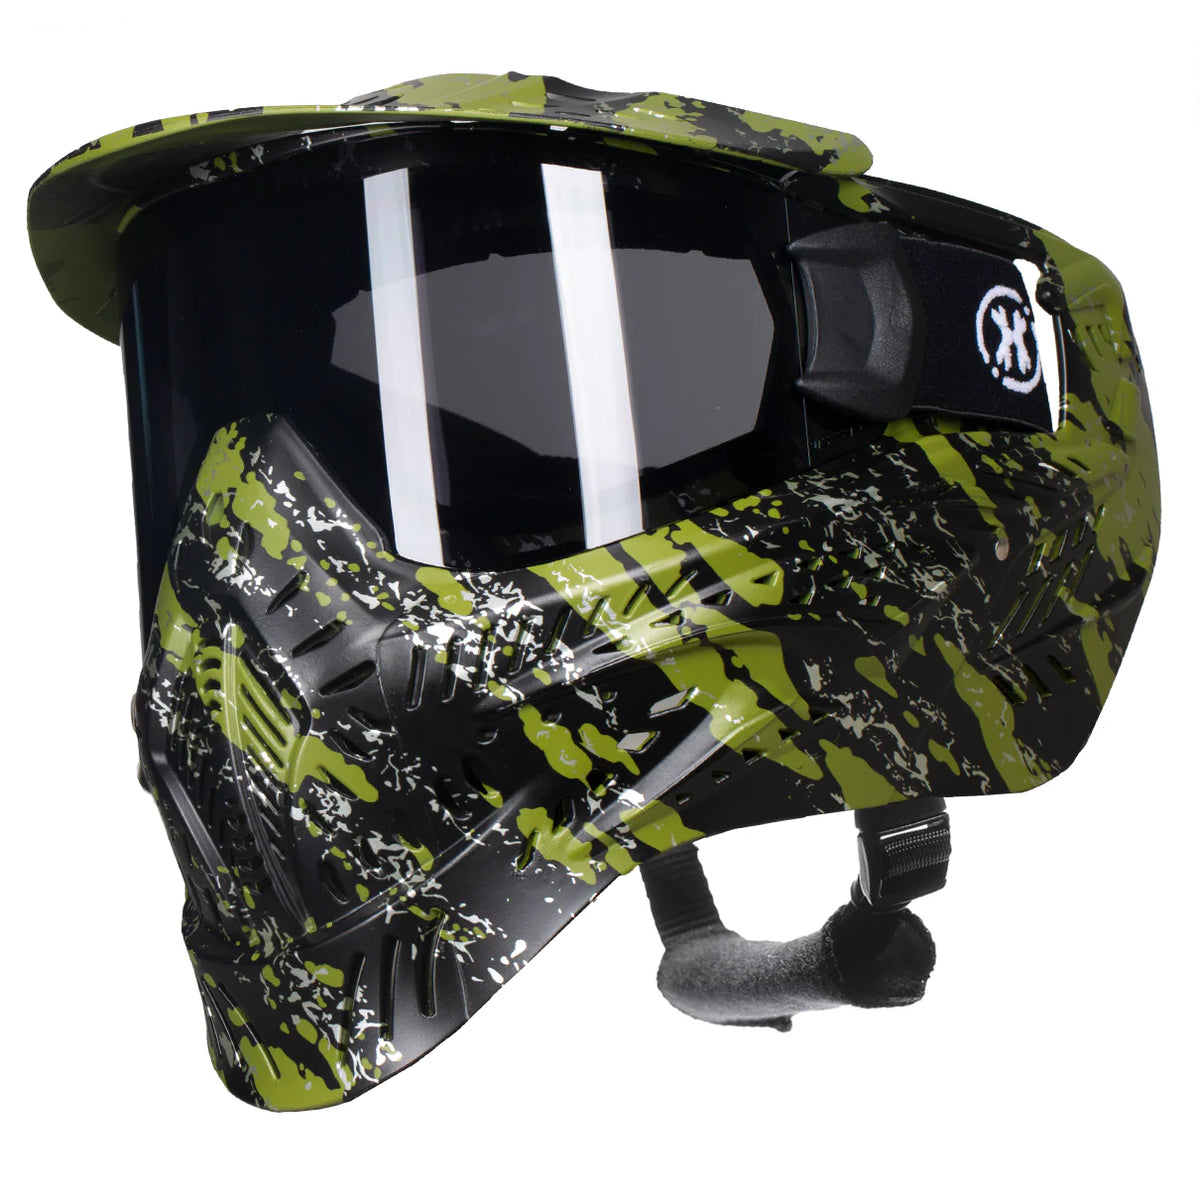 HSTL Goggle | Fracture Black/Olive | Paintball & Airsoft Goggle